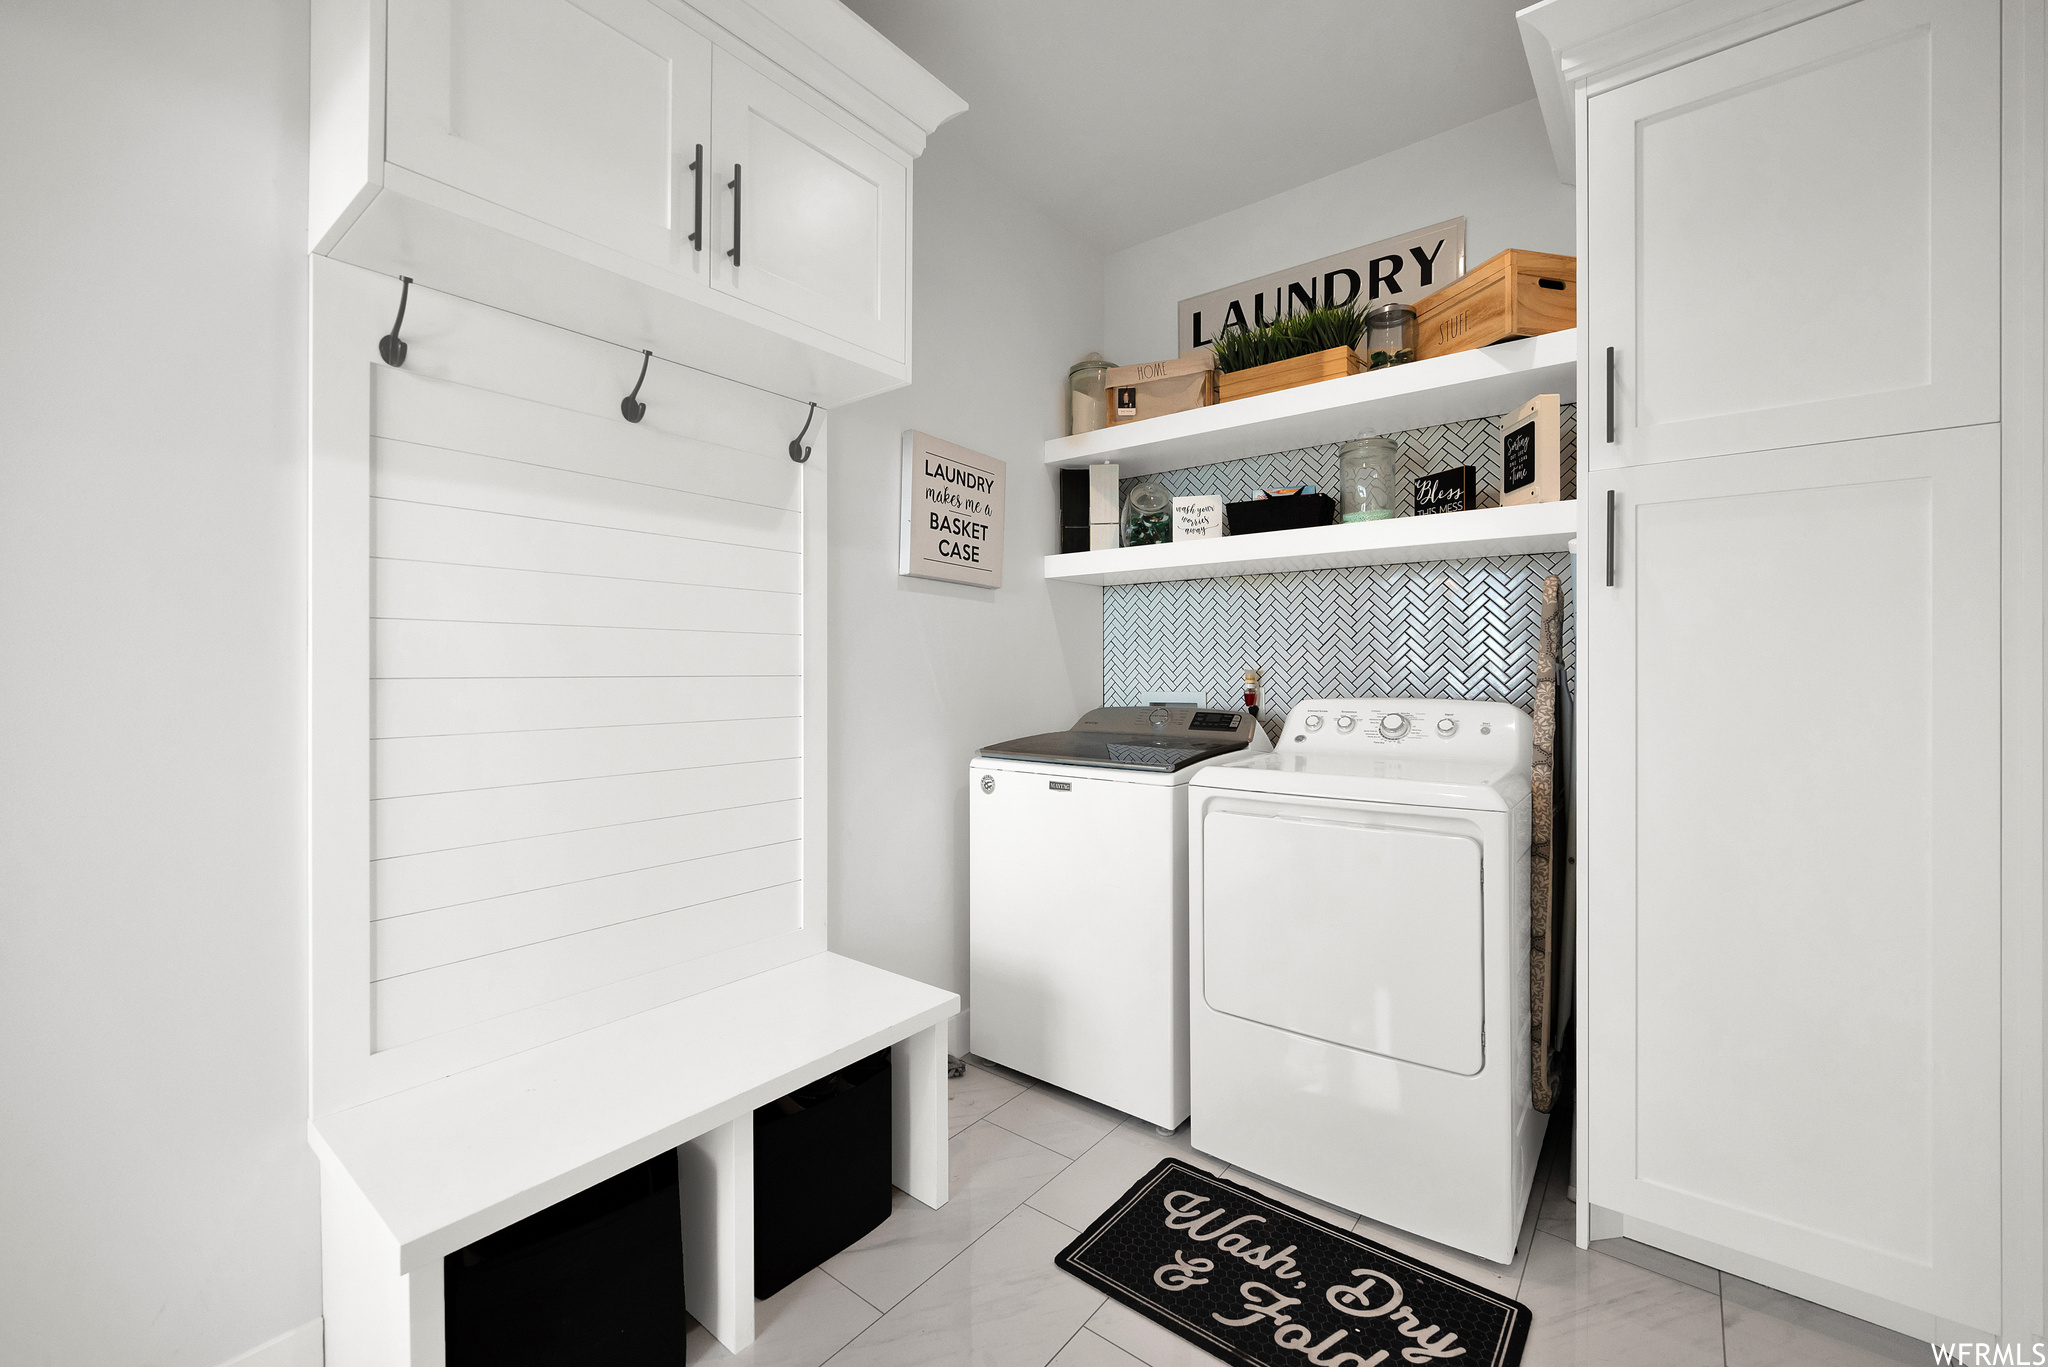 Laundry room with tile flooring and separate washer and dryer